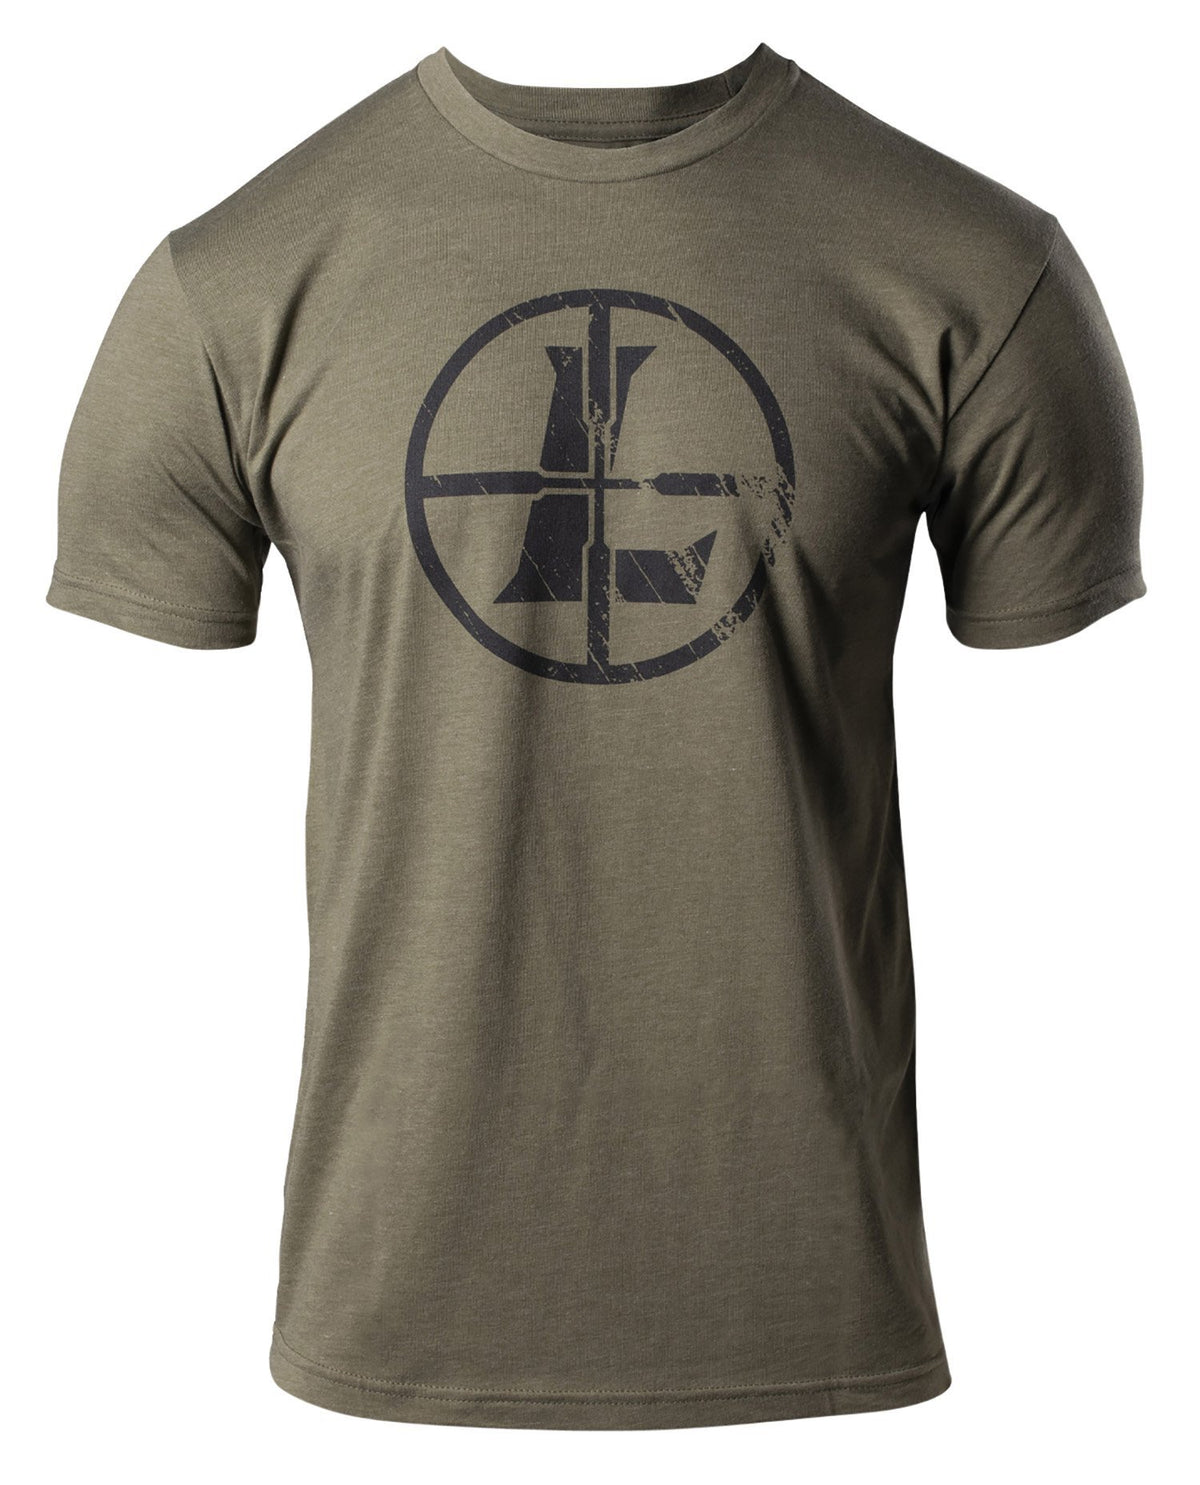 Leupold Distressed Reticle T-Shirt Military Green Large Short Sleeve - Pacific Flyway Supplies